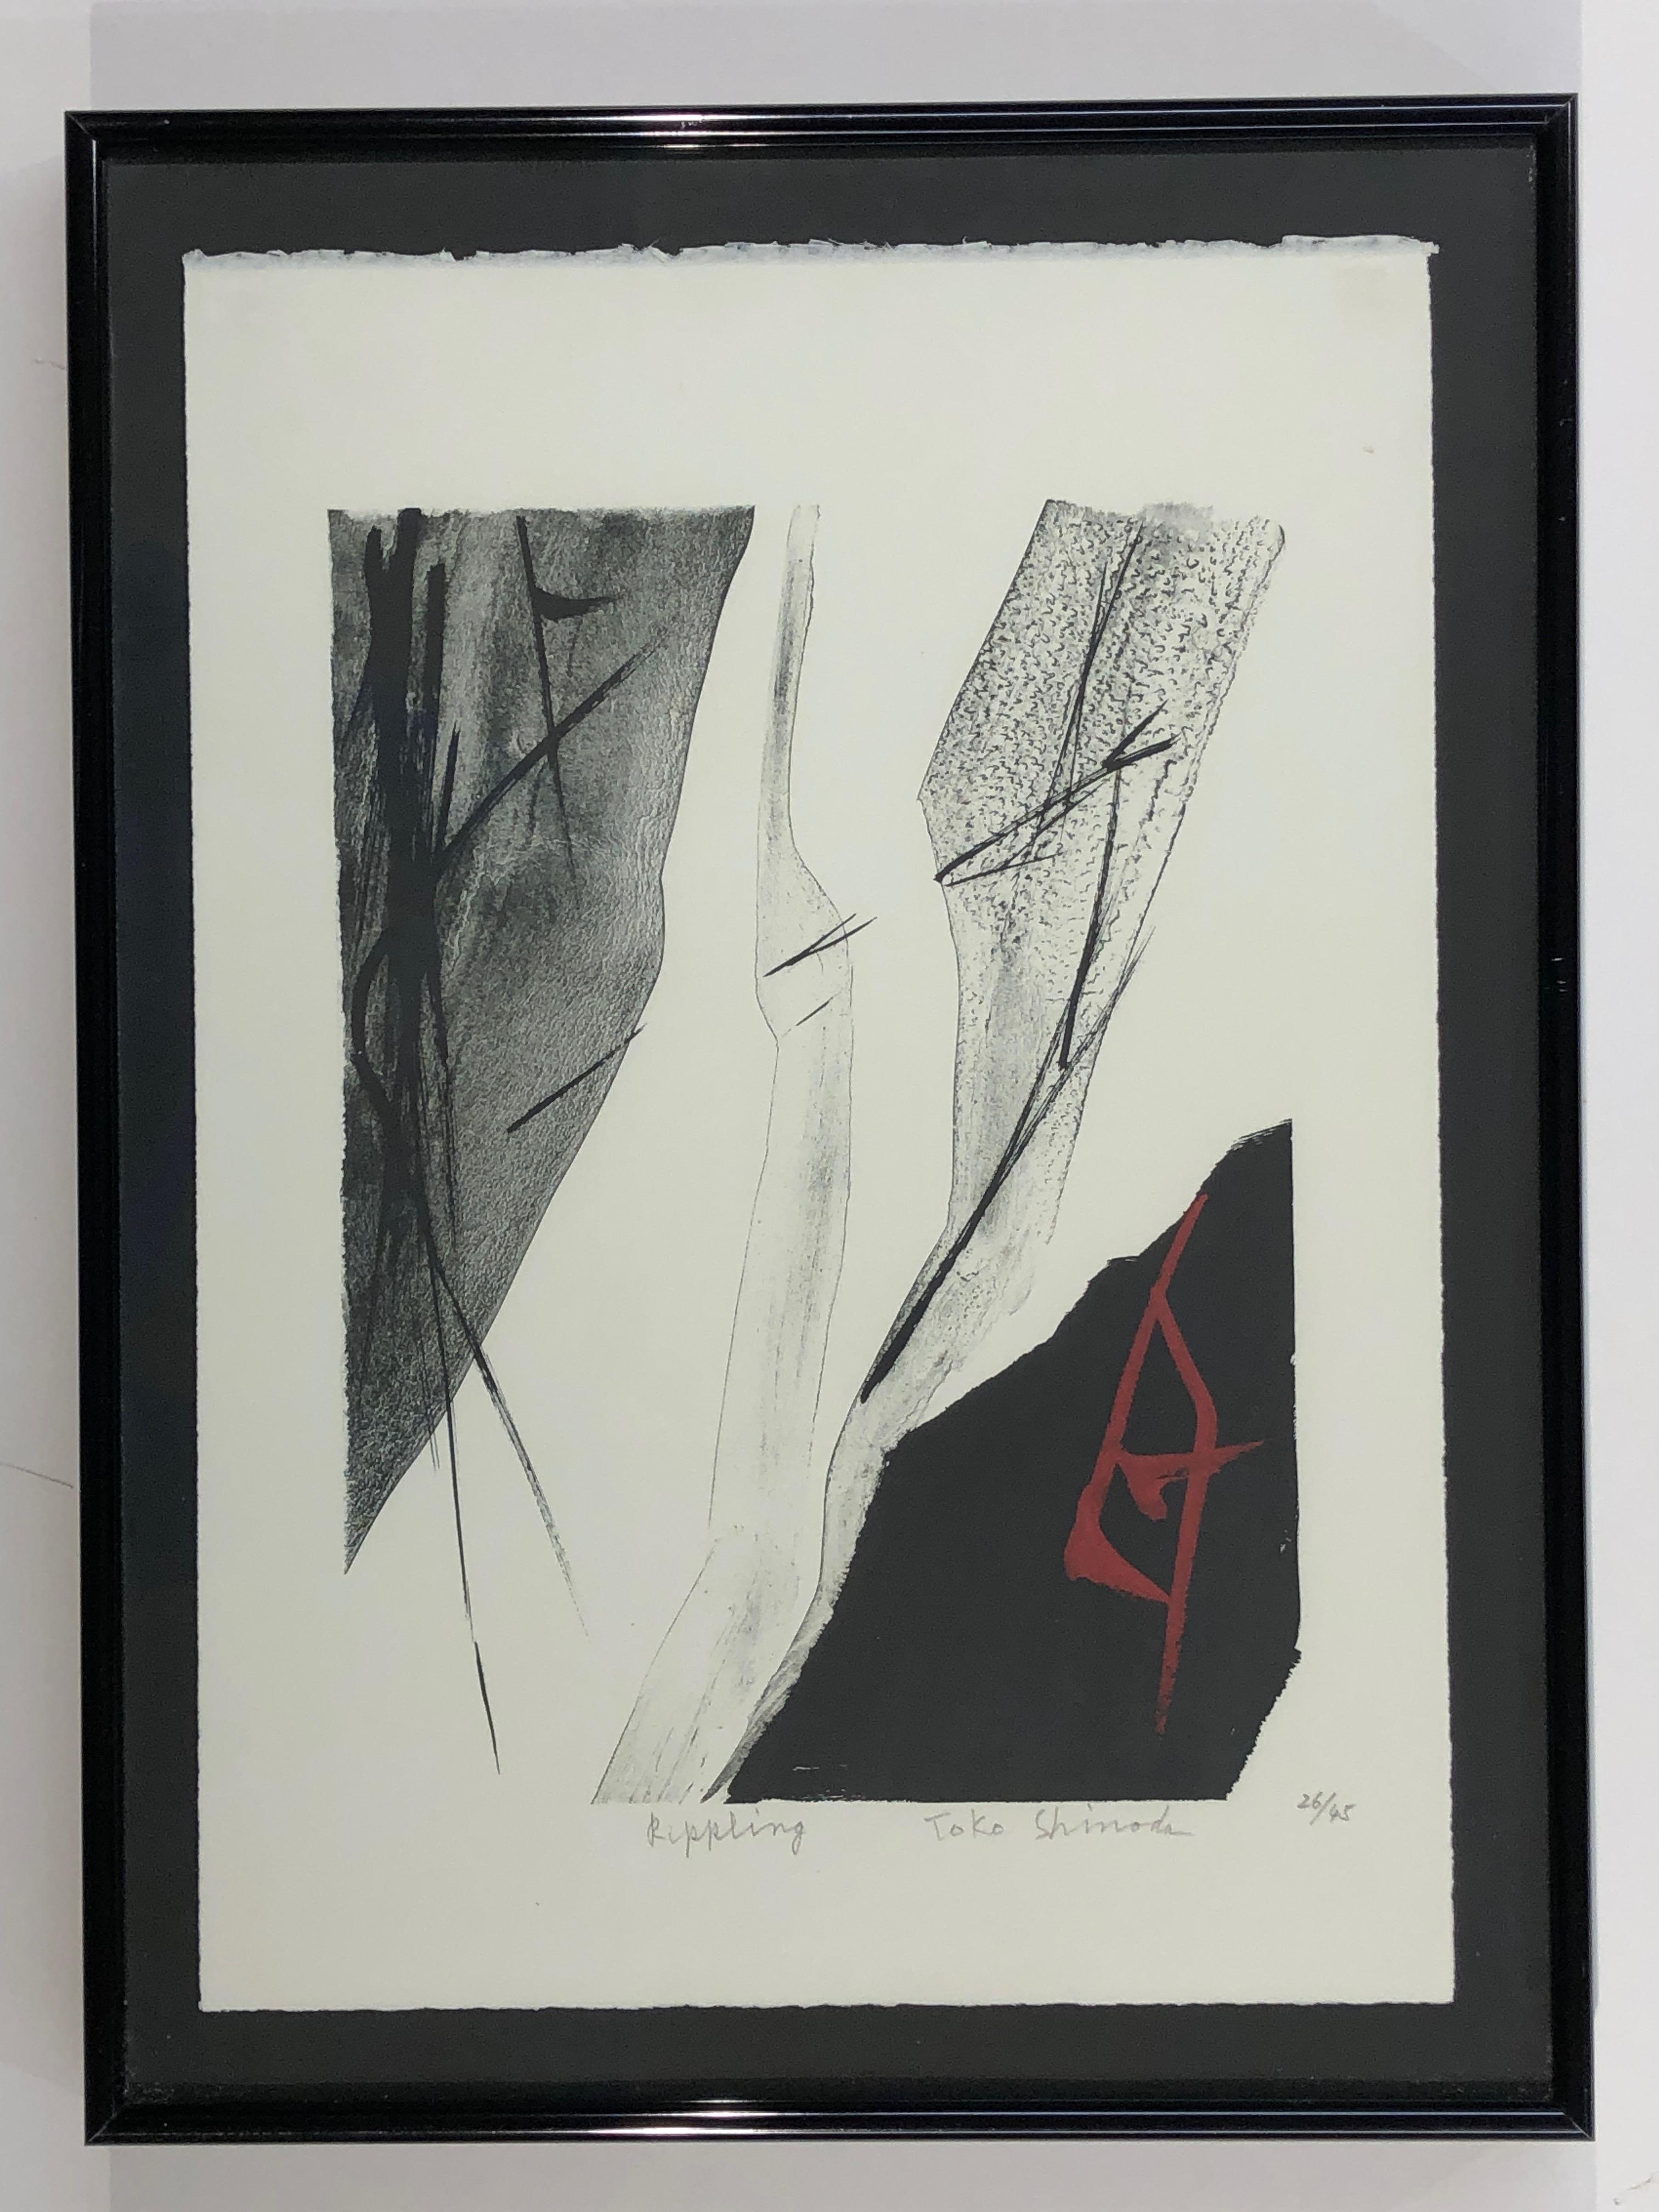 Toko Shinoda Print - Rippling, limited edition lithograph, Japanese, black, white, red, signed